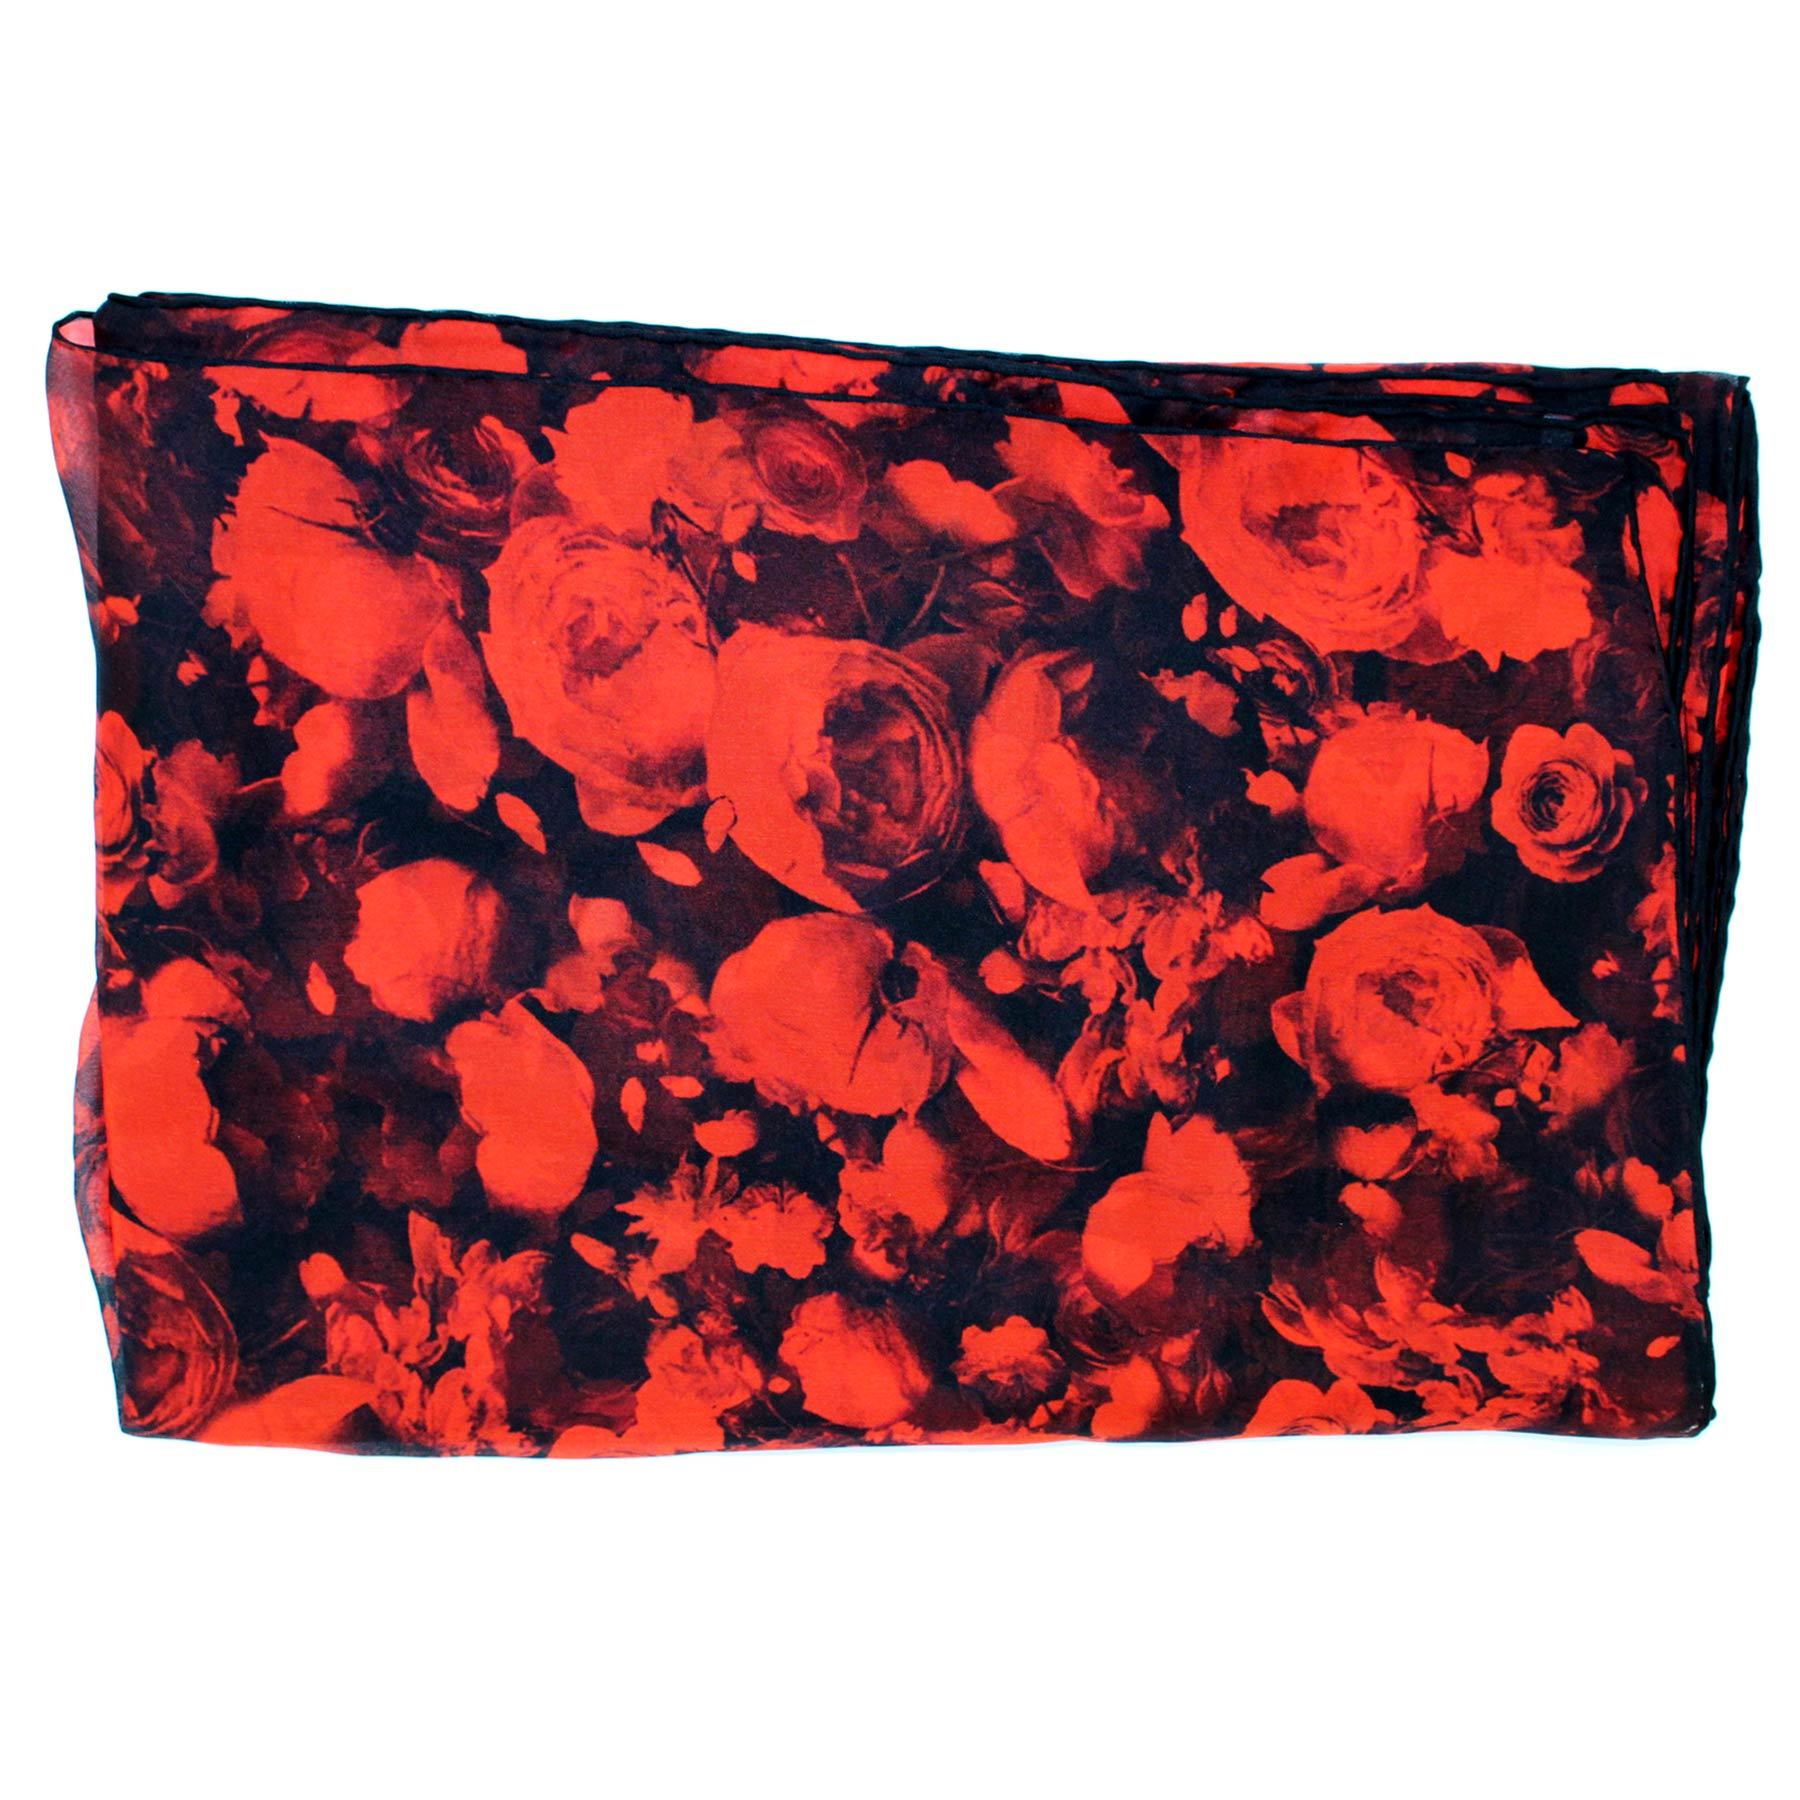 Givenchy Scarf Black Red Roses - Extra Large Chiffon Silk Square Scarf Sale